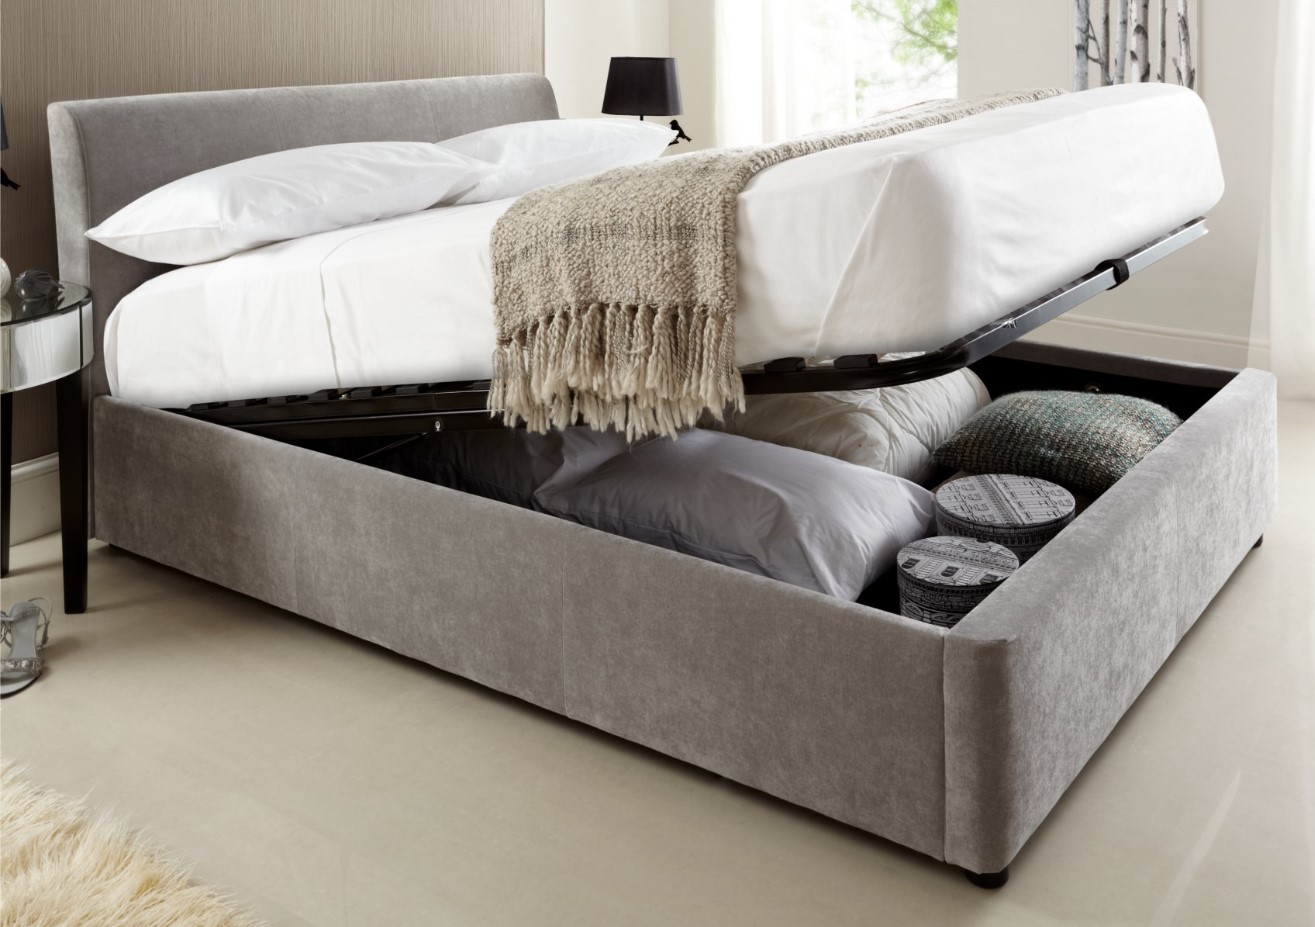 super single beds with storage